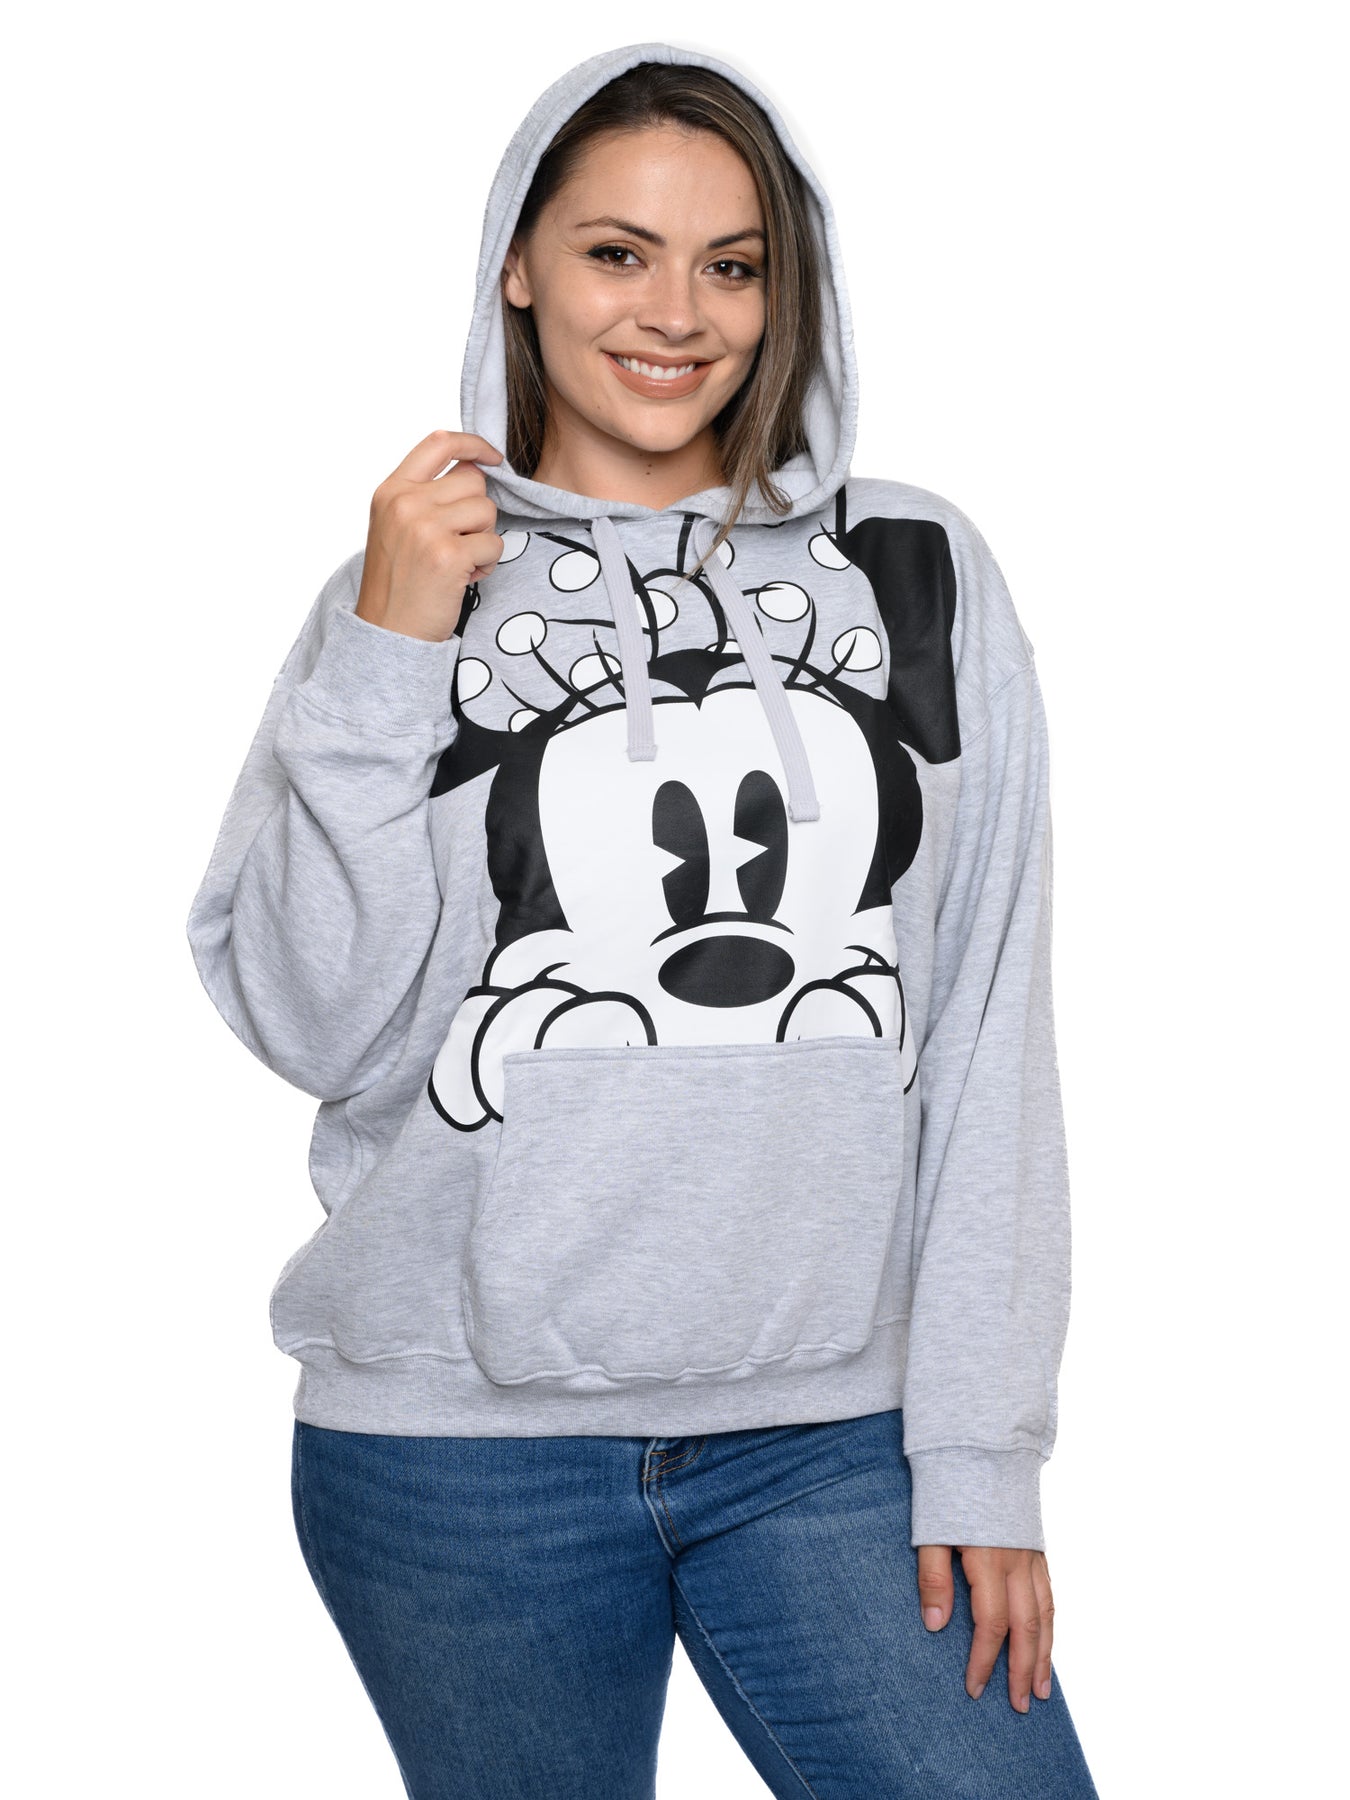 Disney Women's Hoodies, Mickey Mouse Blanket Hoodie, Minnie and Mickey  Gifts